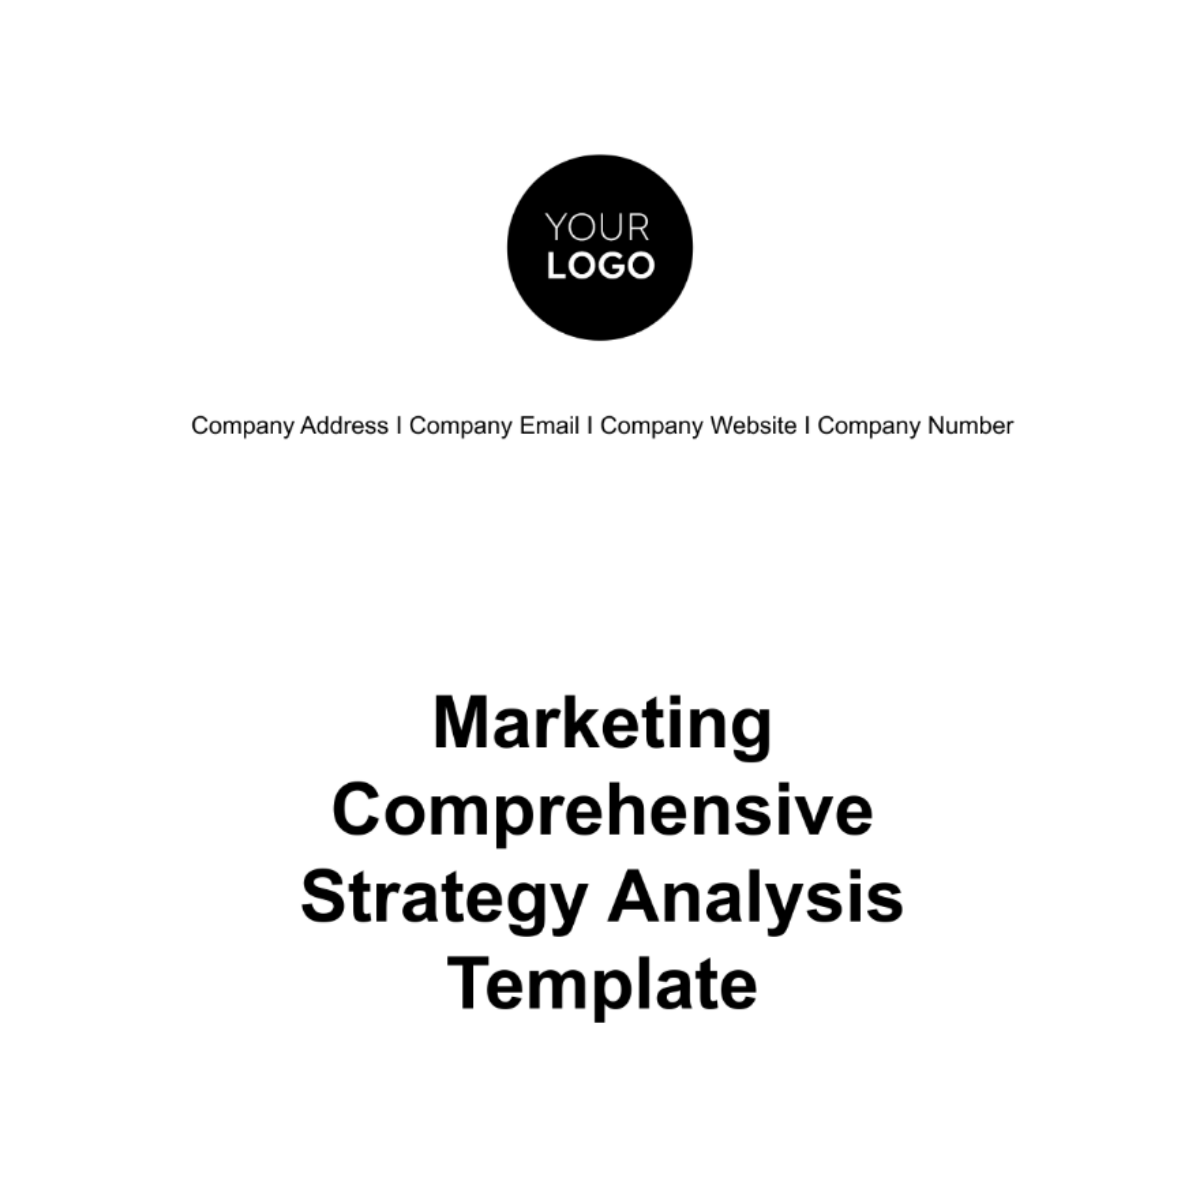 Marketing Comprehensive Strategy Analysis Template